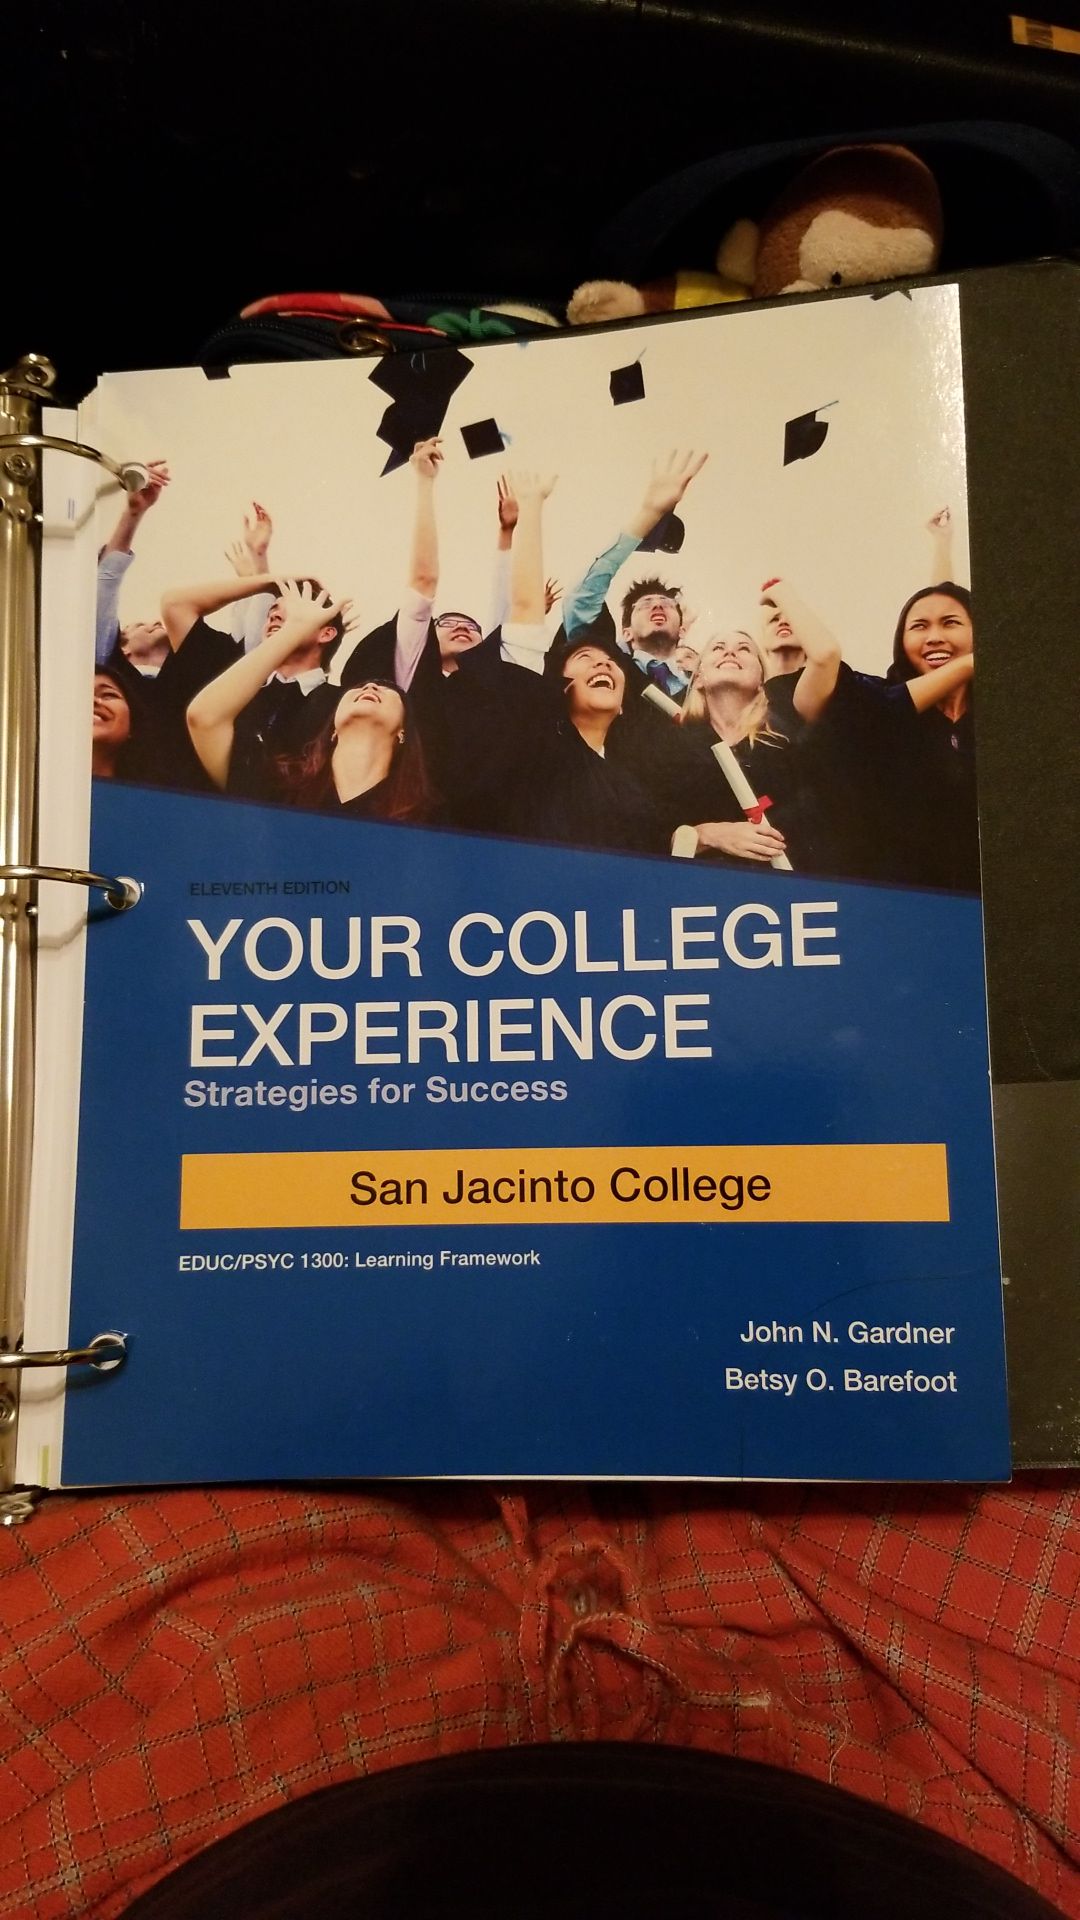 Your college experience eleventh edition